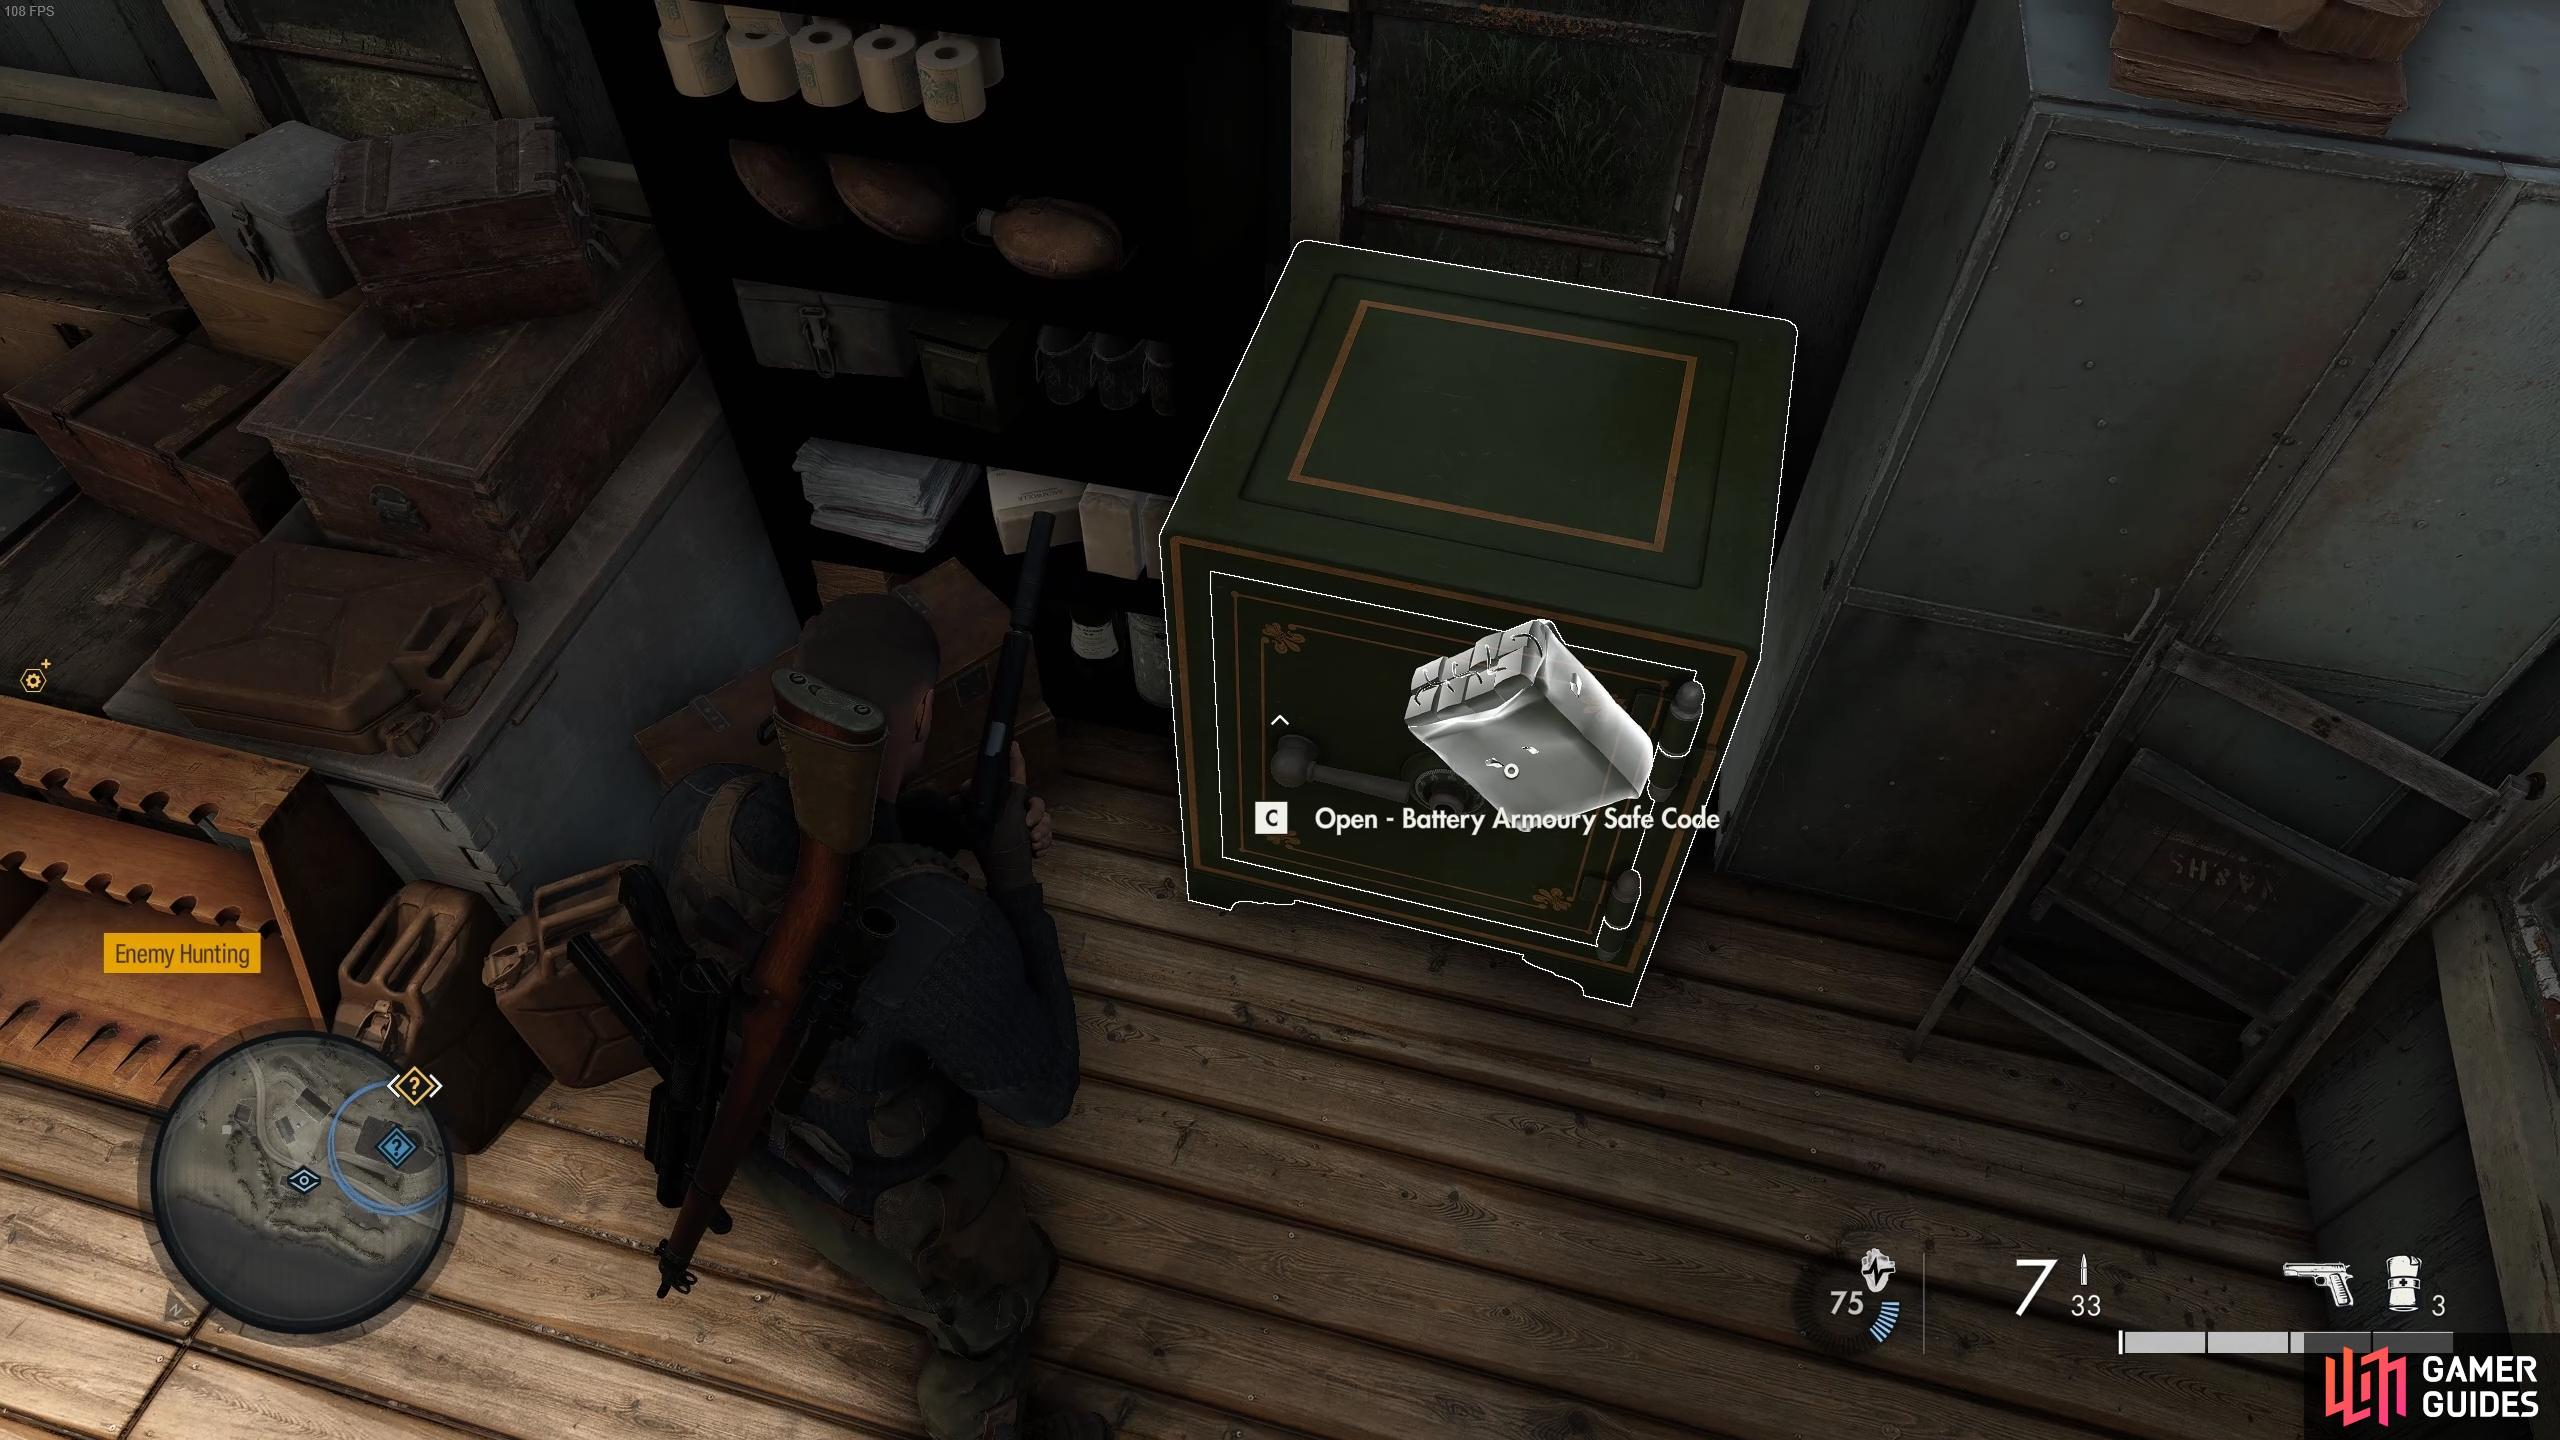 If you don't have the key to the door, you'll need a satchel charge to enter the room where this chest is located.